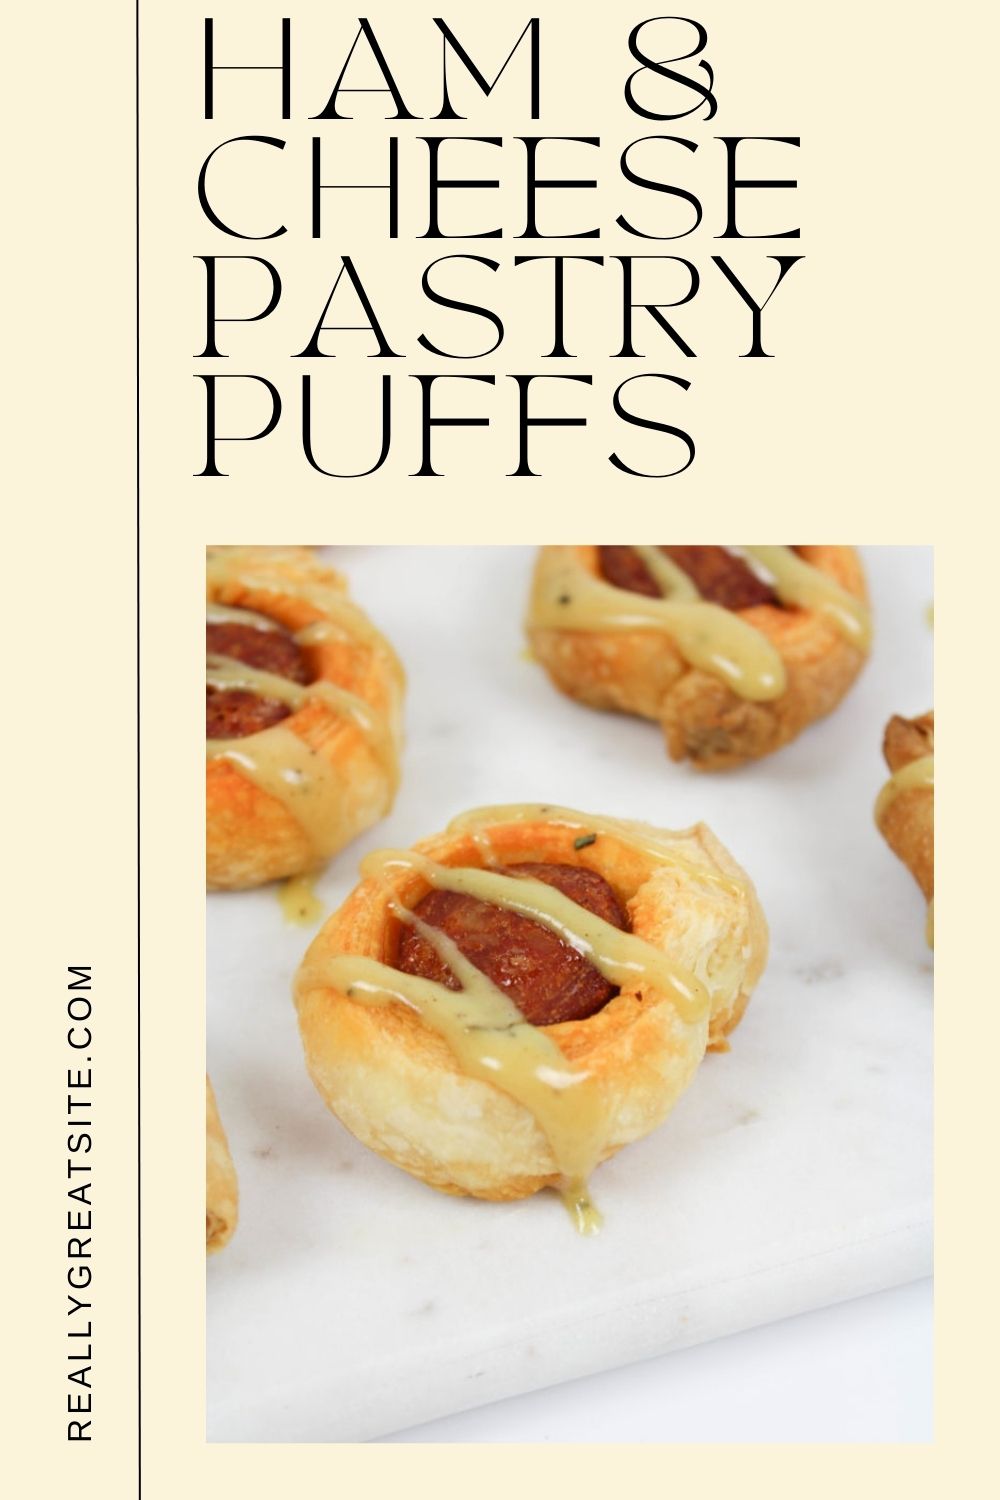 Sausage appetizers with puff pastry